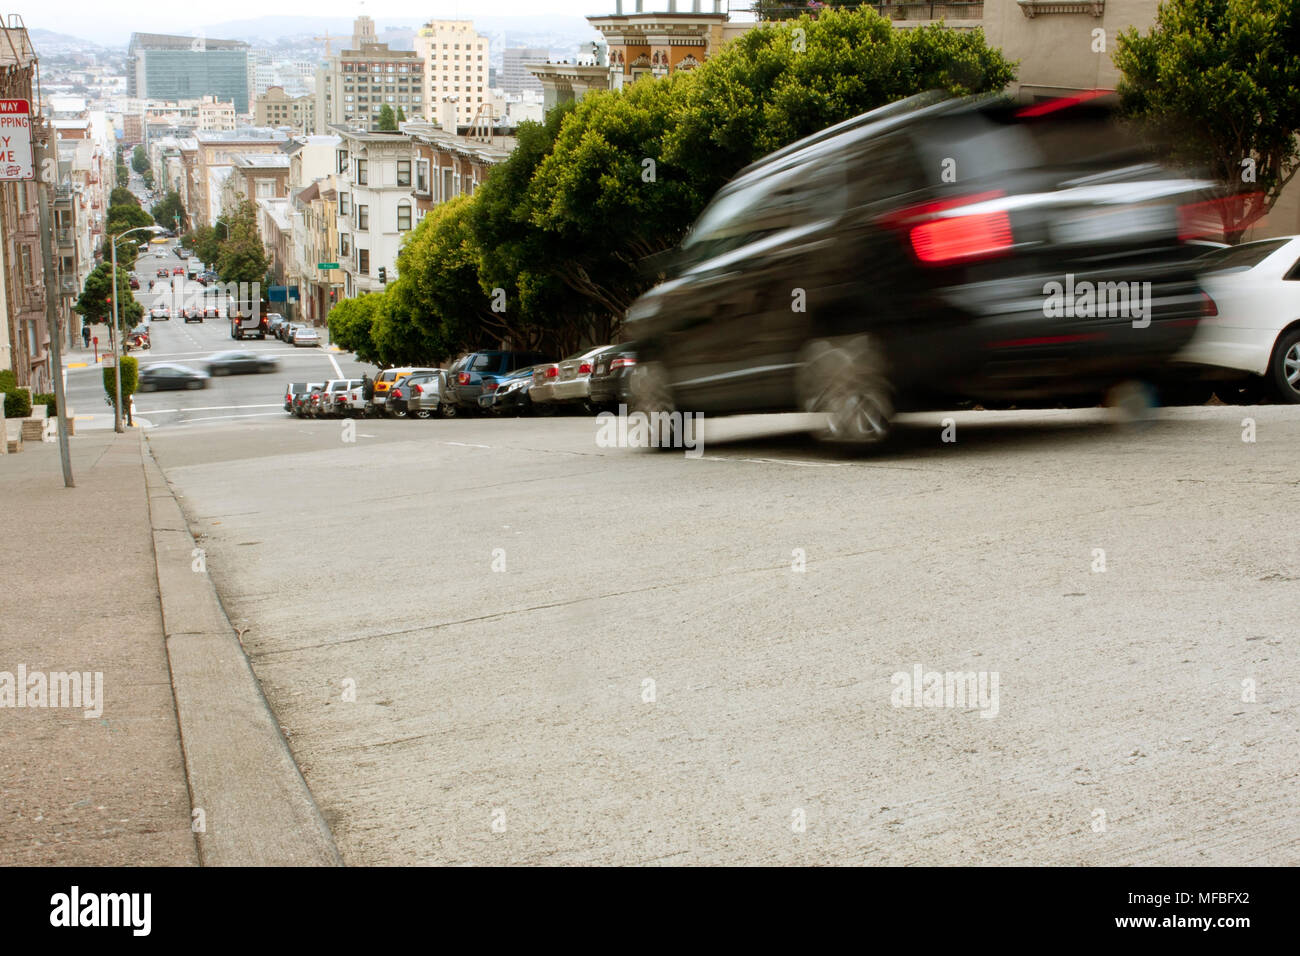 San Francisco, CA, USA - May 18, 2015:  A car motion blurs while braking down a steep hill in the Nob Hill area of San Francisco. Stock Photo